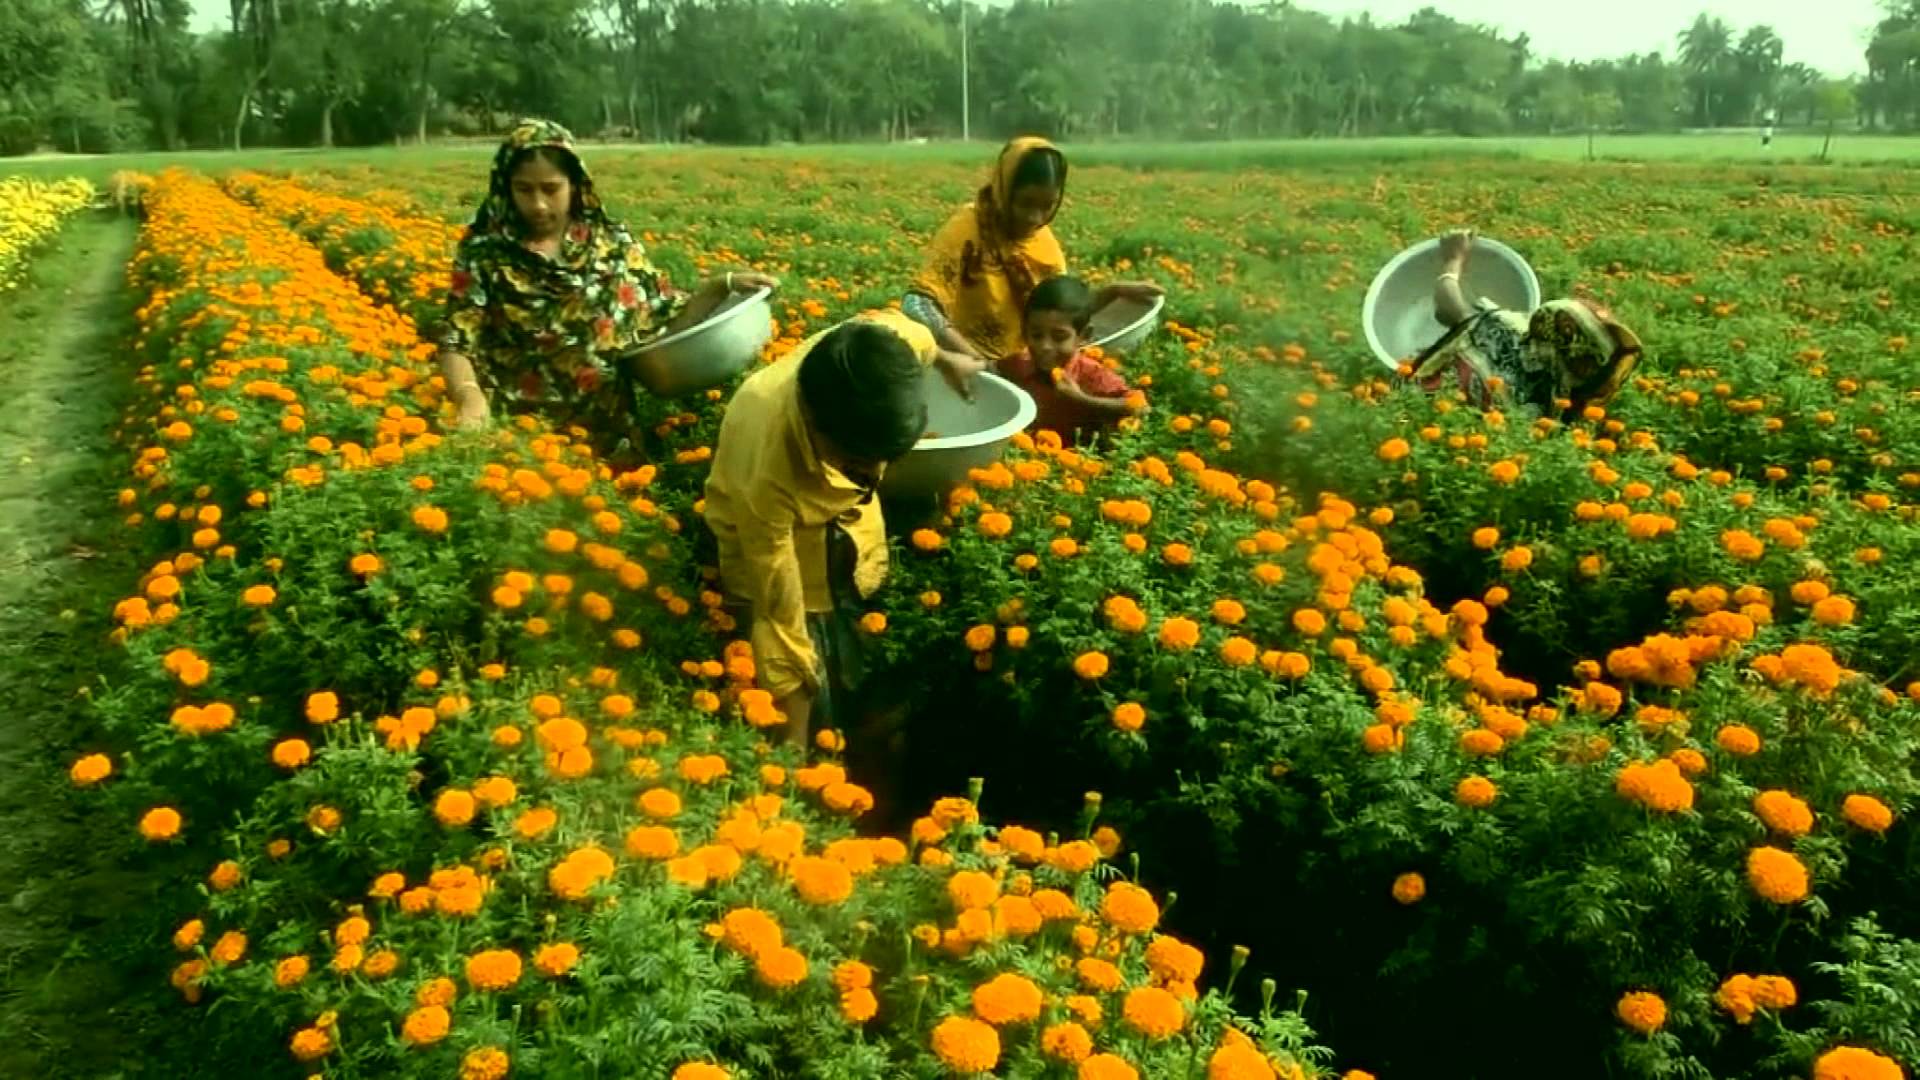 Marigold flower garden in bangladesh | How to Plant, Grow, and Care ...